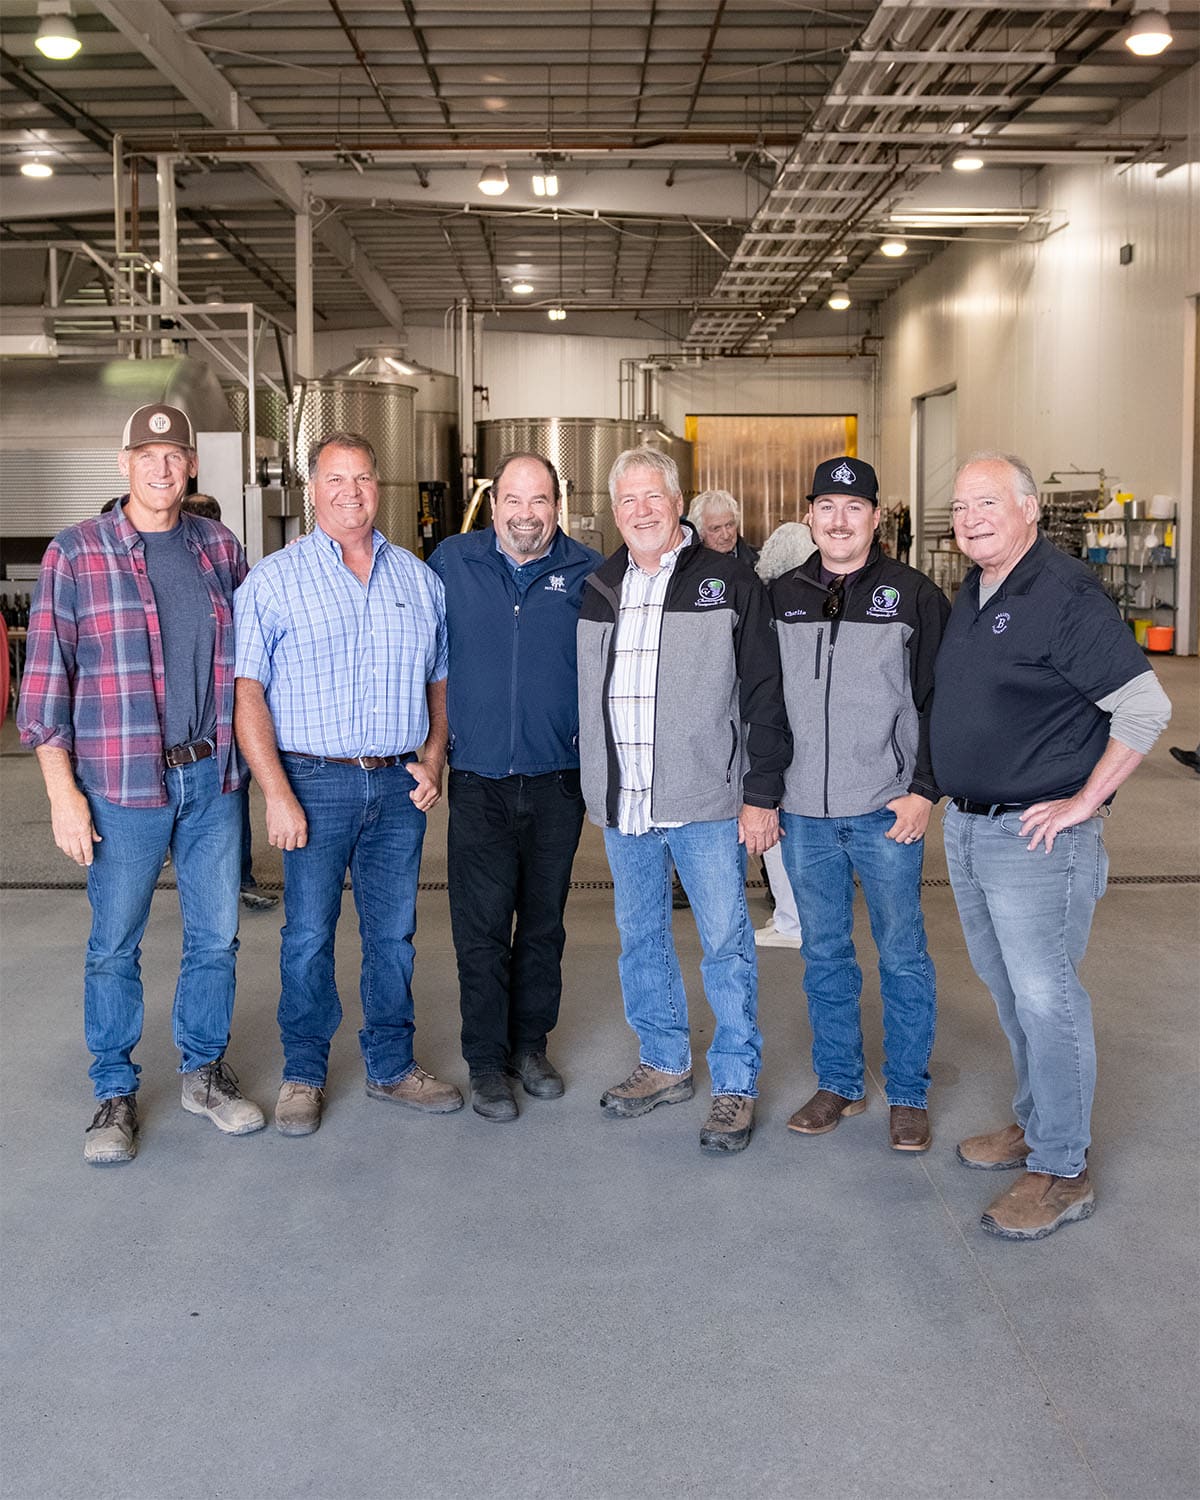 Six men stand side by side inside a spacious industrial building with high ceilings and bright lighting. They are wearing casual and semi-casual clothing, including plaid shirts, jackets, and jeans. The background shows industrial equipment and a person in the distance. Everyone is smiling.
